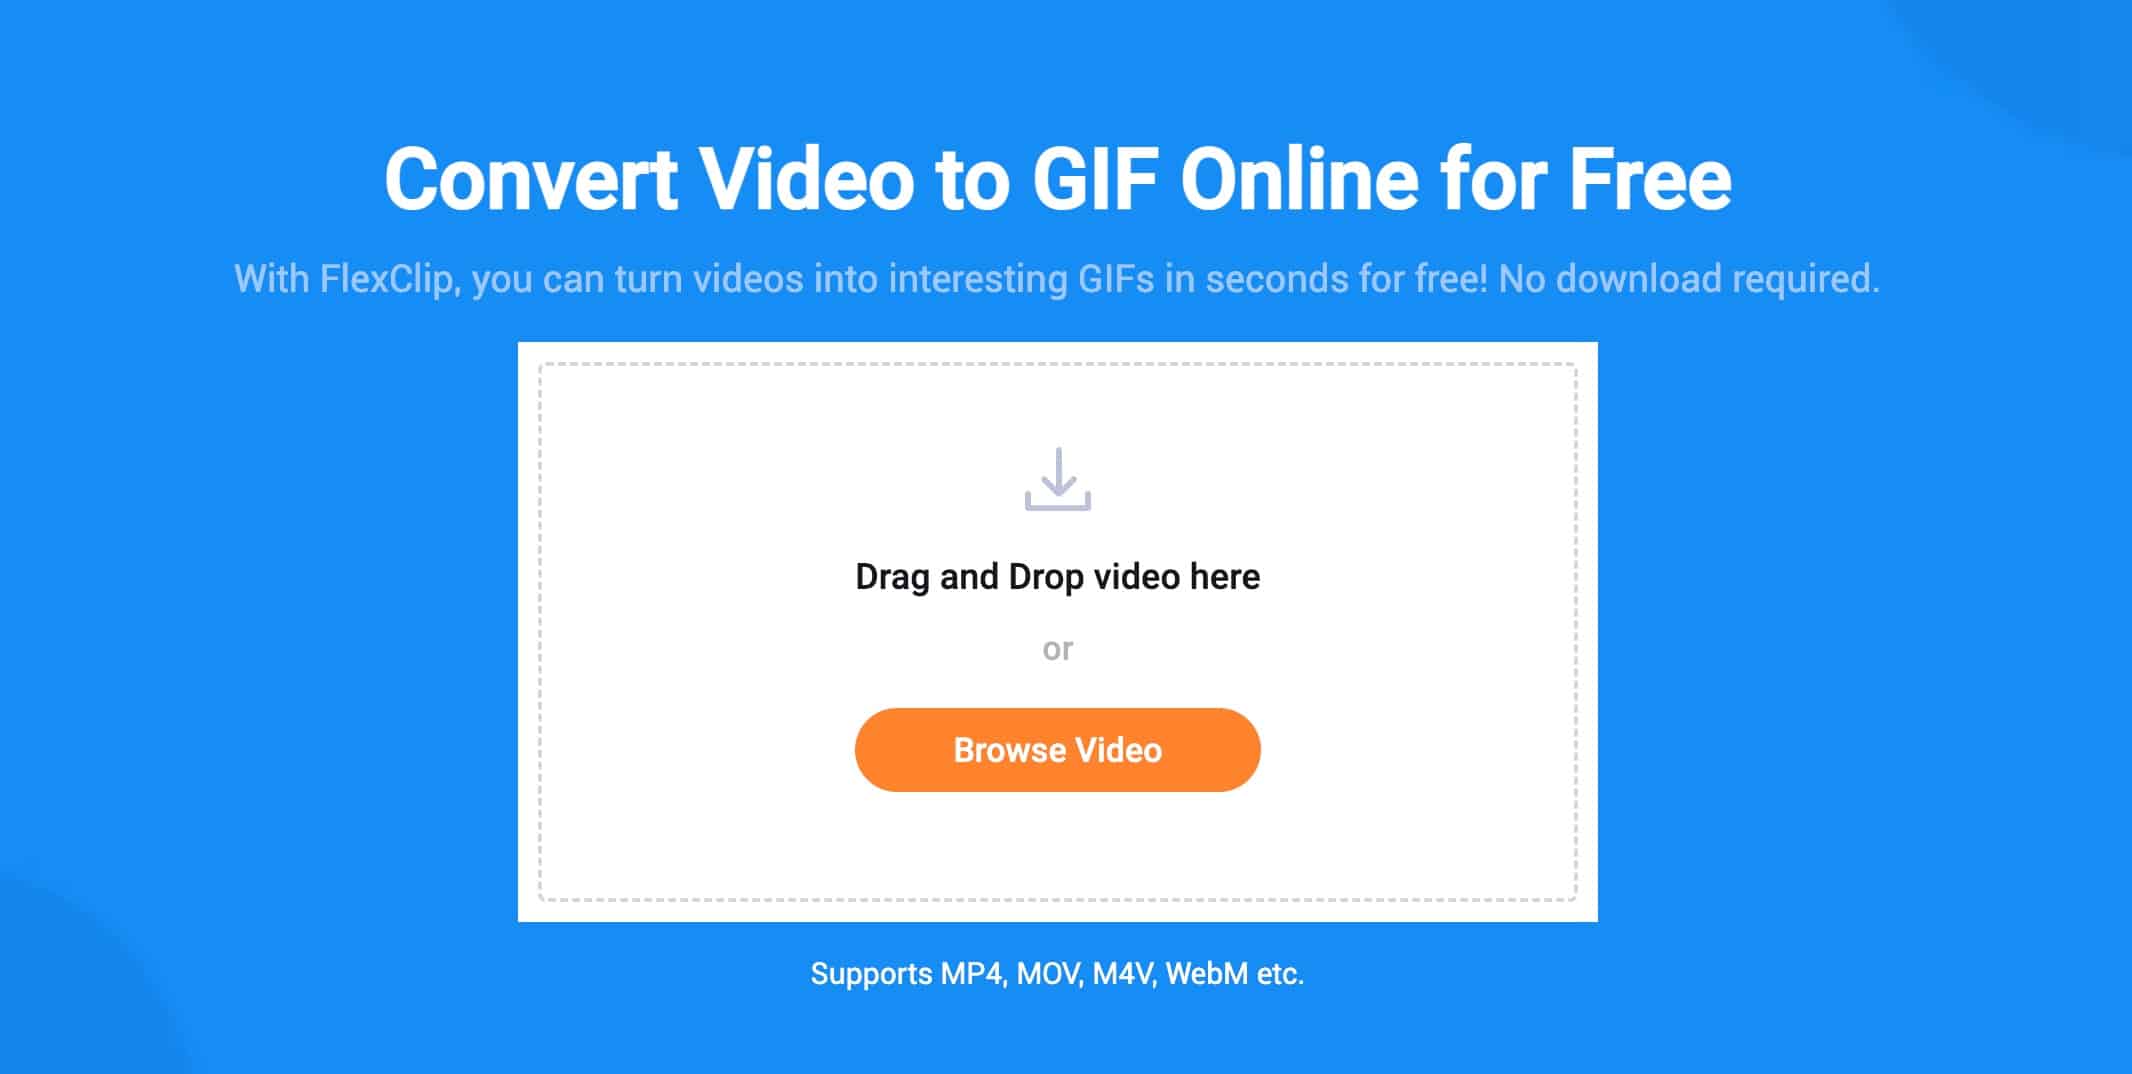 FlexClip Video to GIF Converter Tool to Convert Videos to GIFs Online